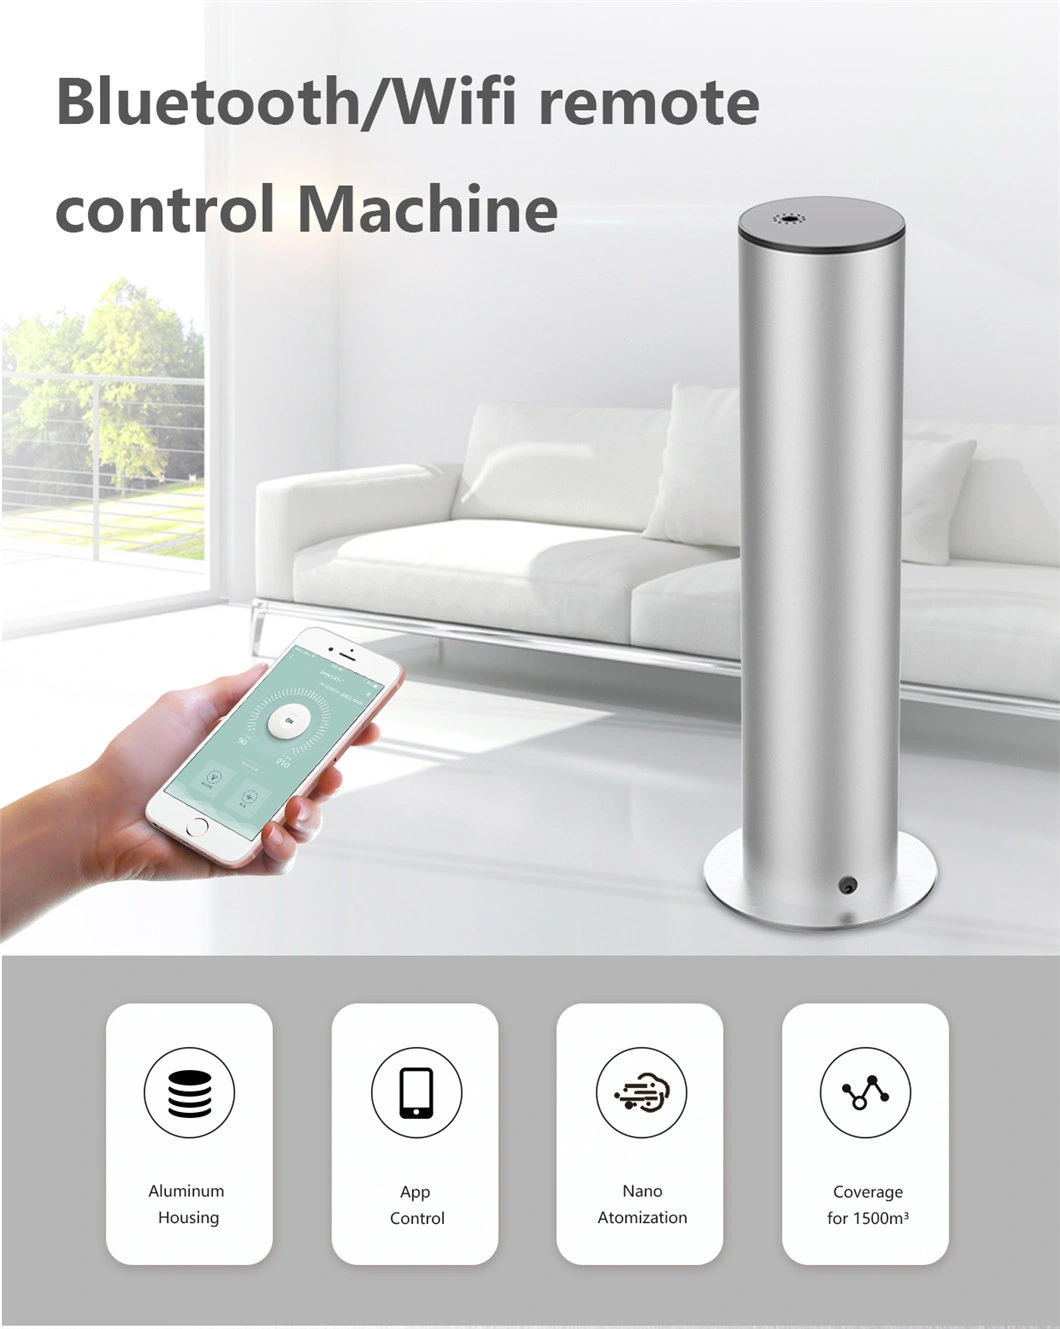 Blue Tooth WiFi Remote Control 500ml Hotel Fragrance Machine Commercial Aroma Diffuser Floor Standing Scent Diffuser